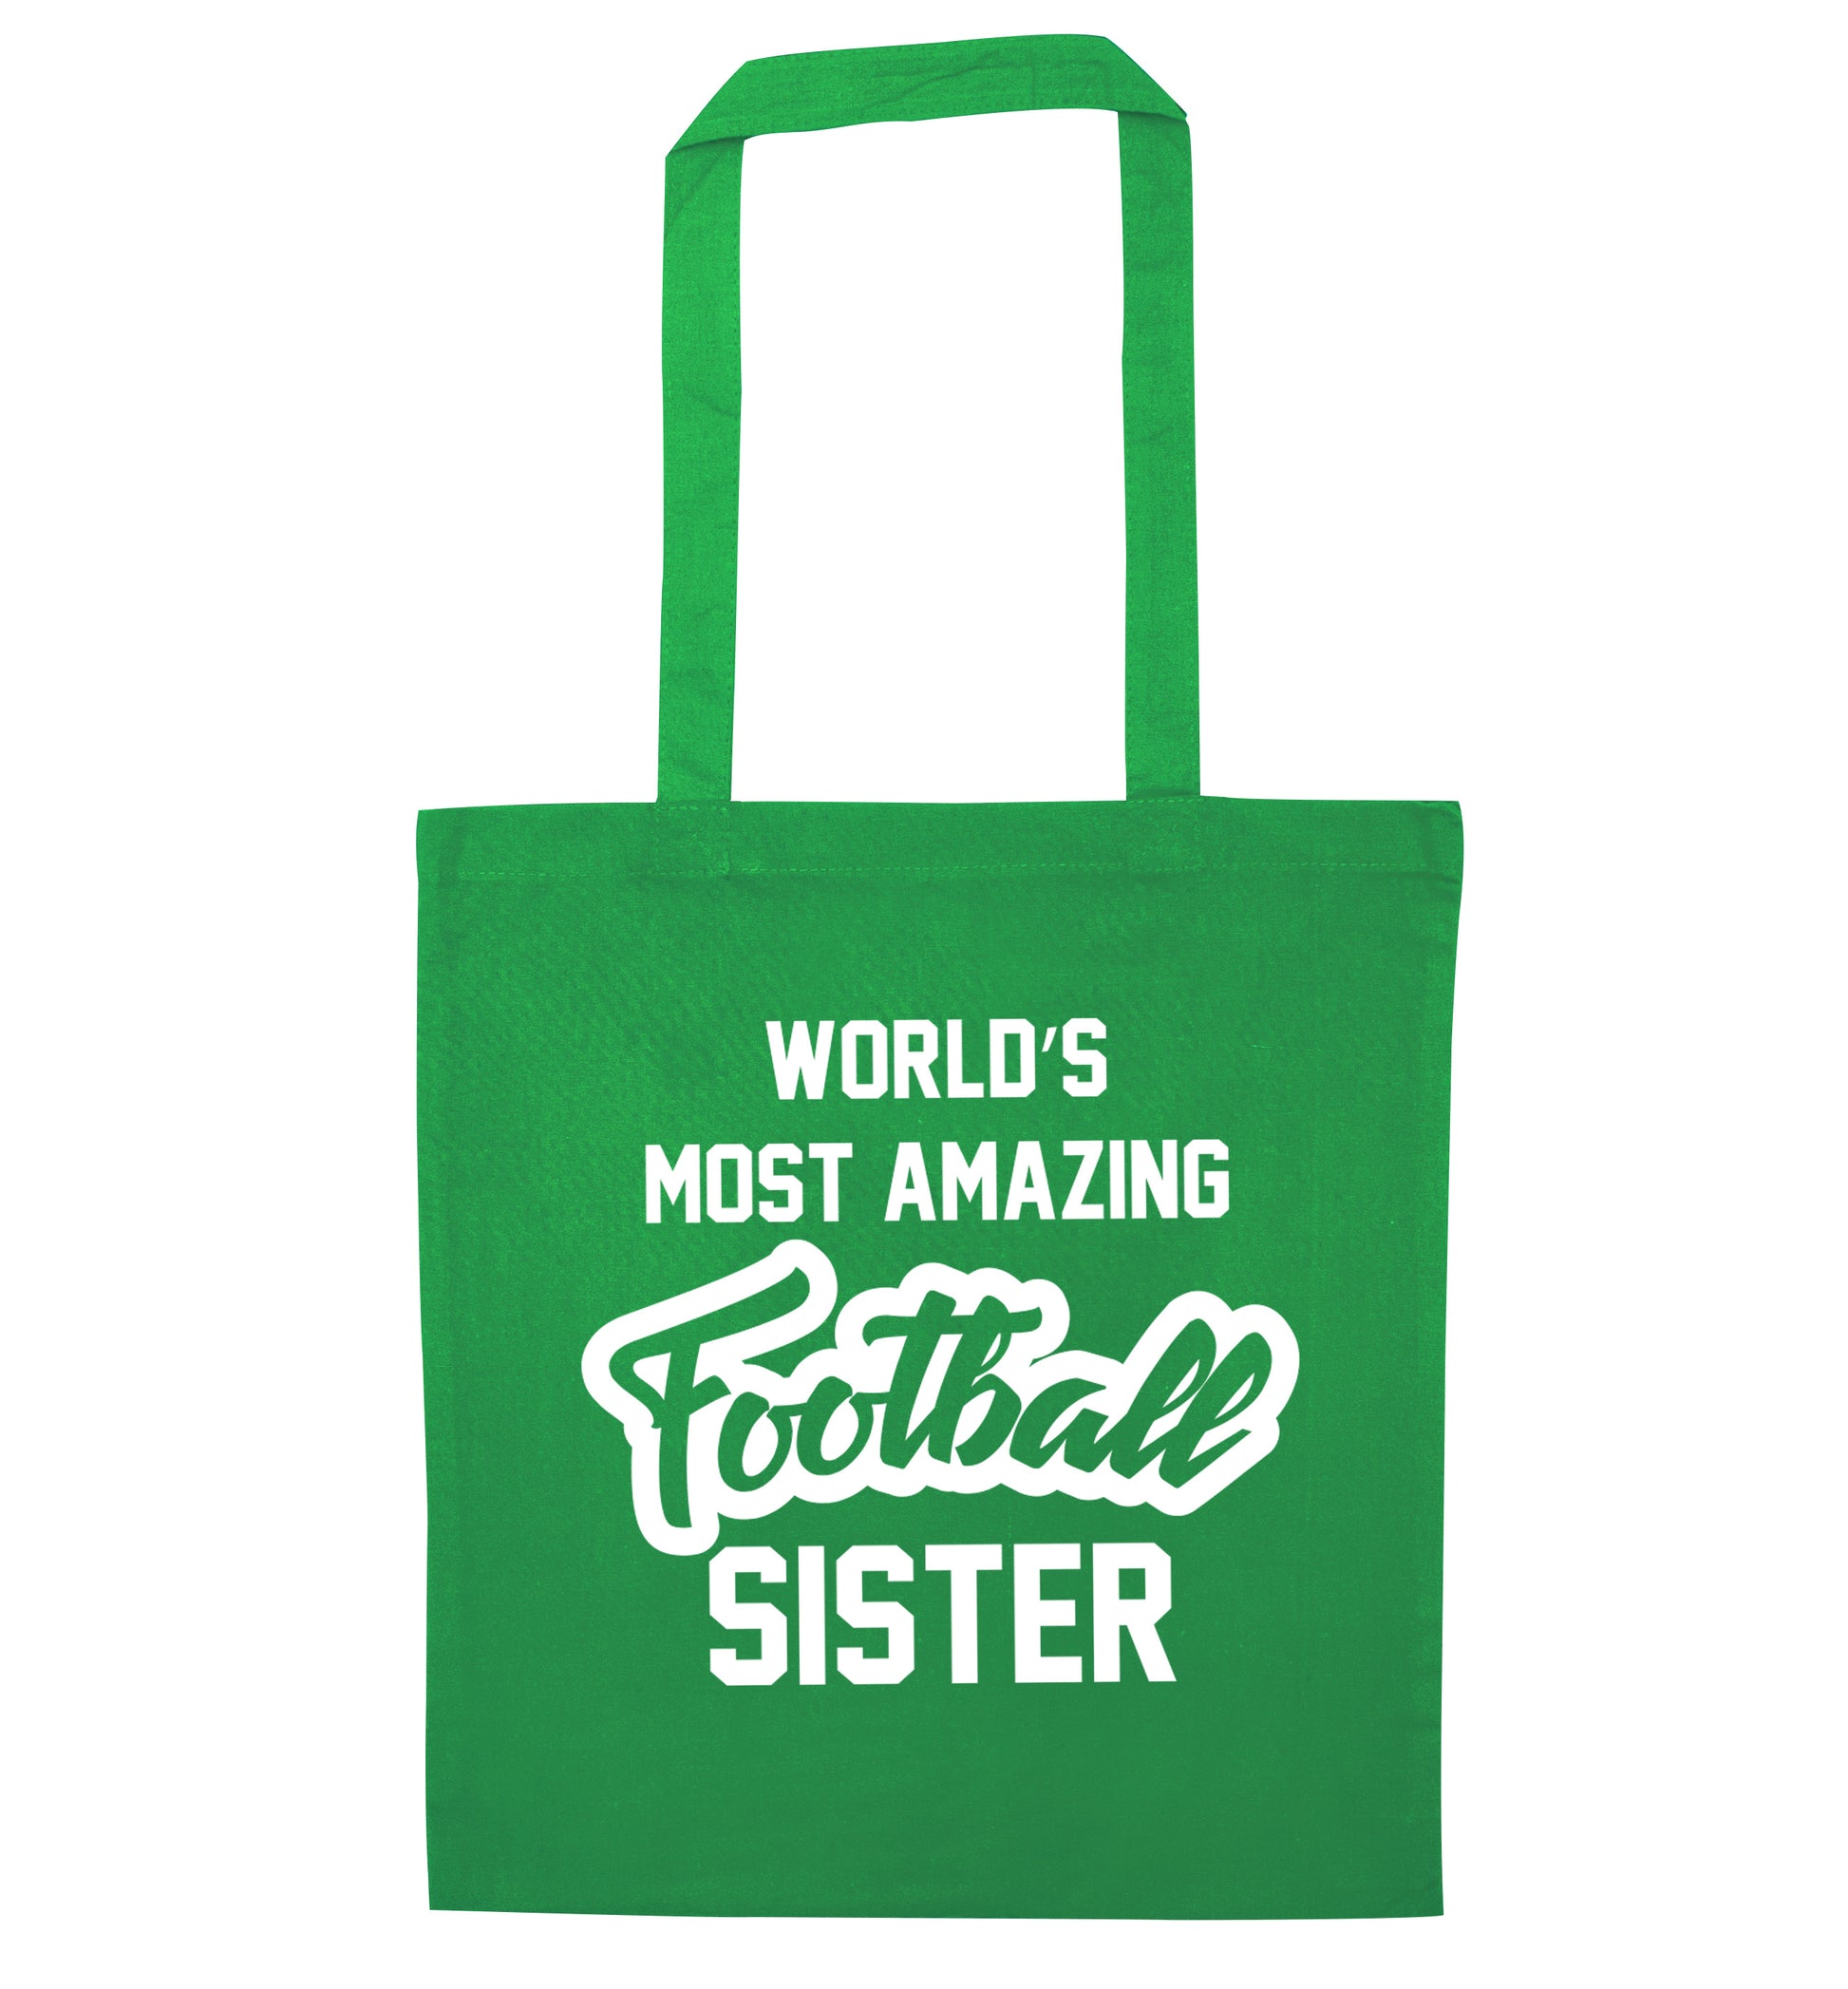 Worlds most amazing football sister green tote bag